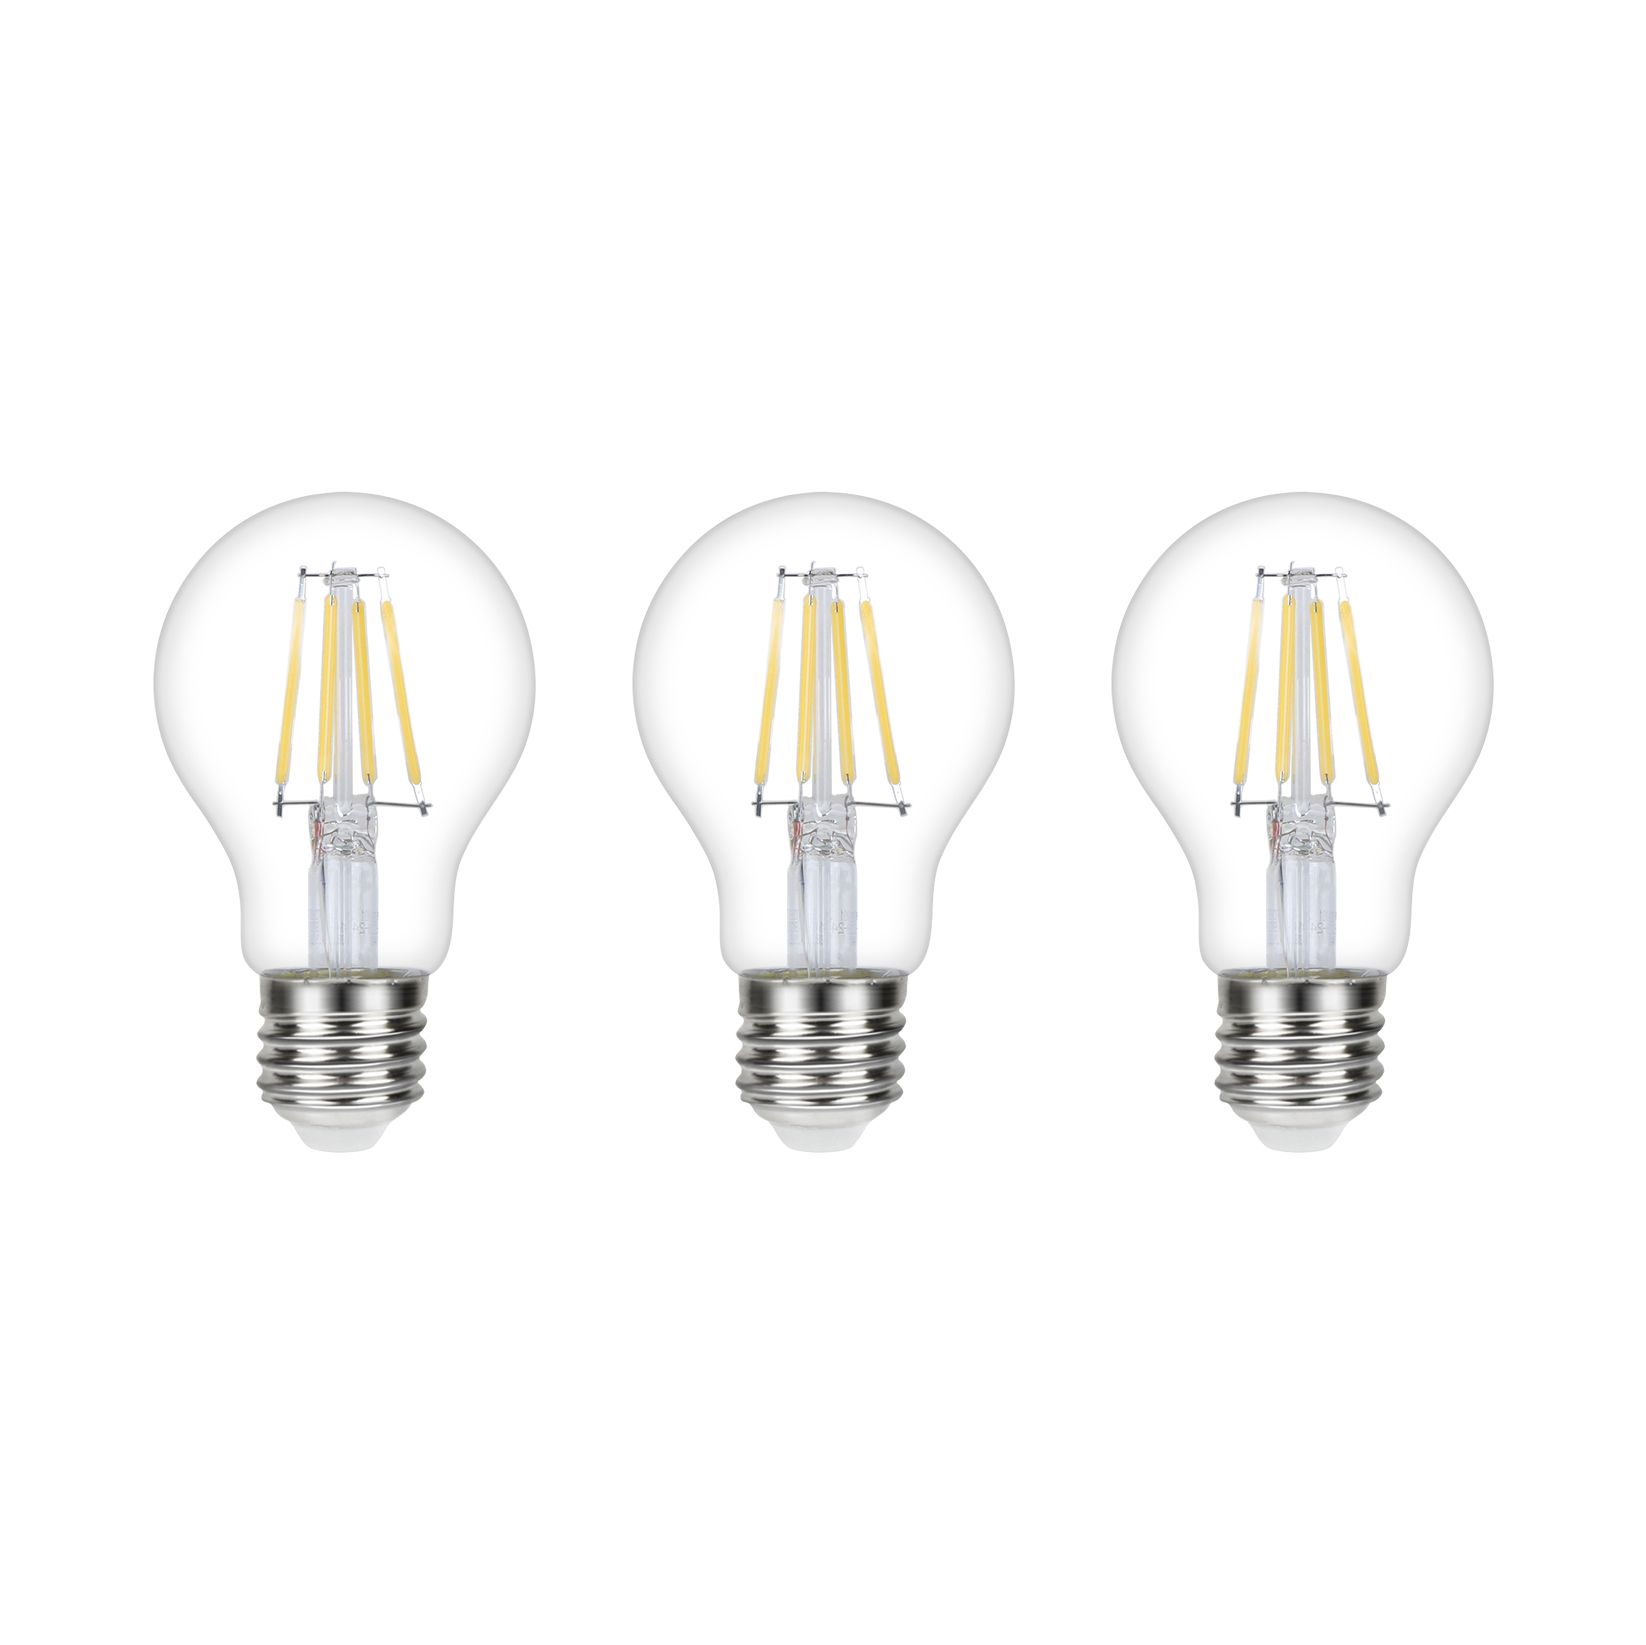 Diall E27 3.4W 470lm Clear GLS Warm white LED Filament Light bulb, Pack of 3